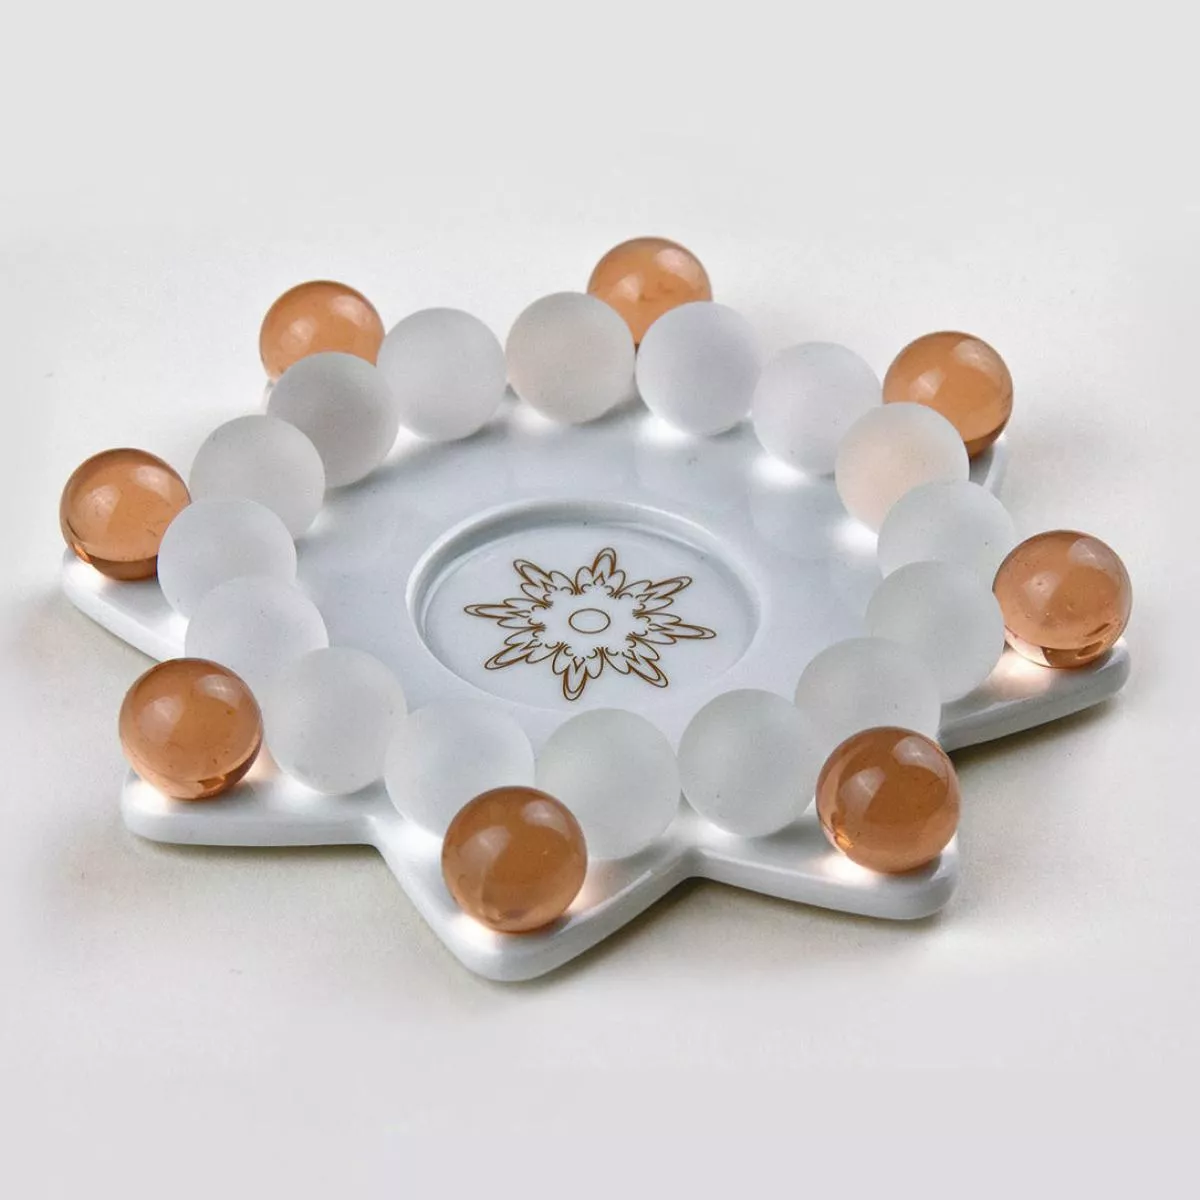 Tealight Candler Holder "Glass Bead Star" with Beautiful Light Refraction – Rosé